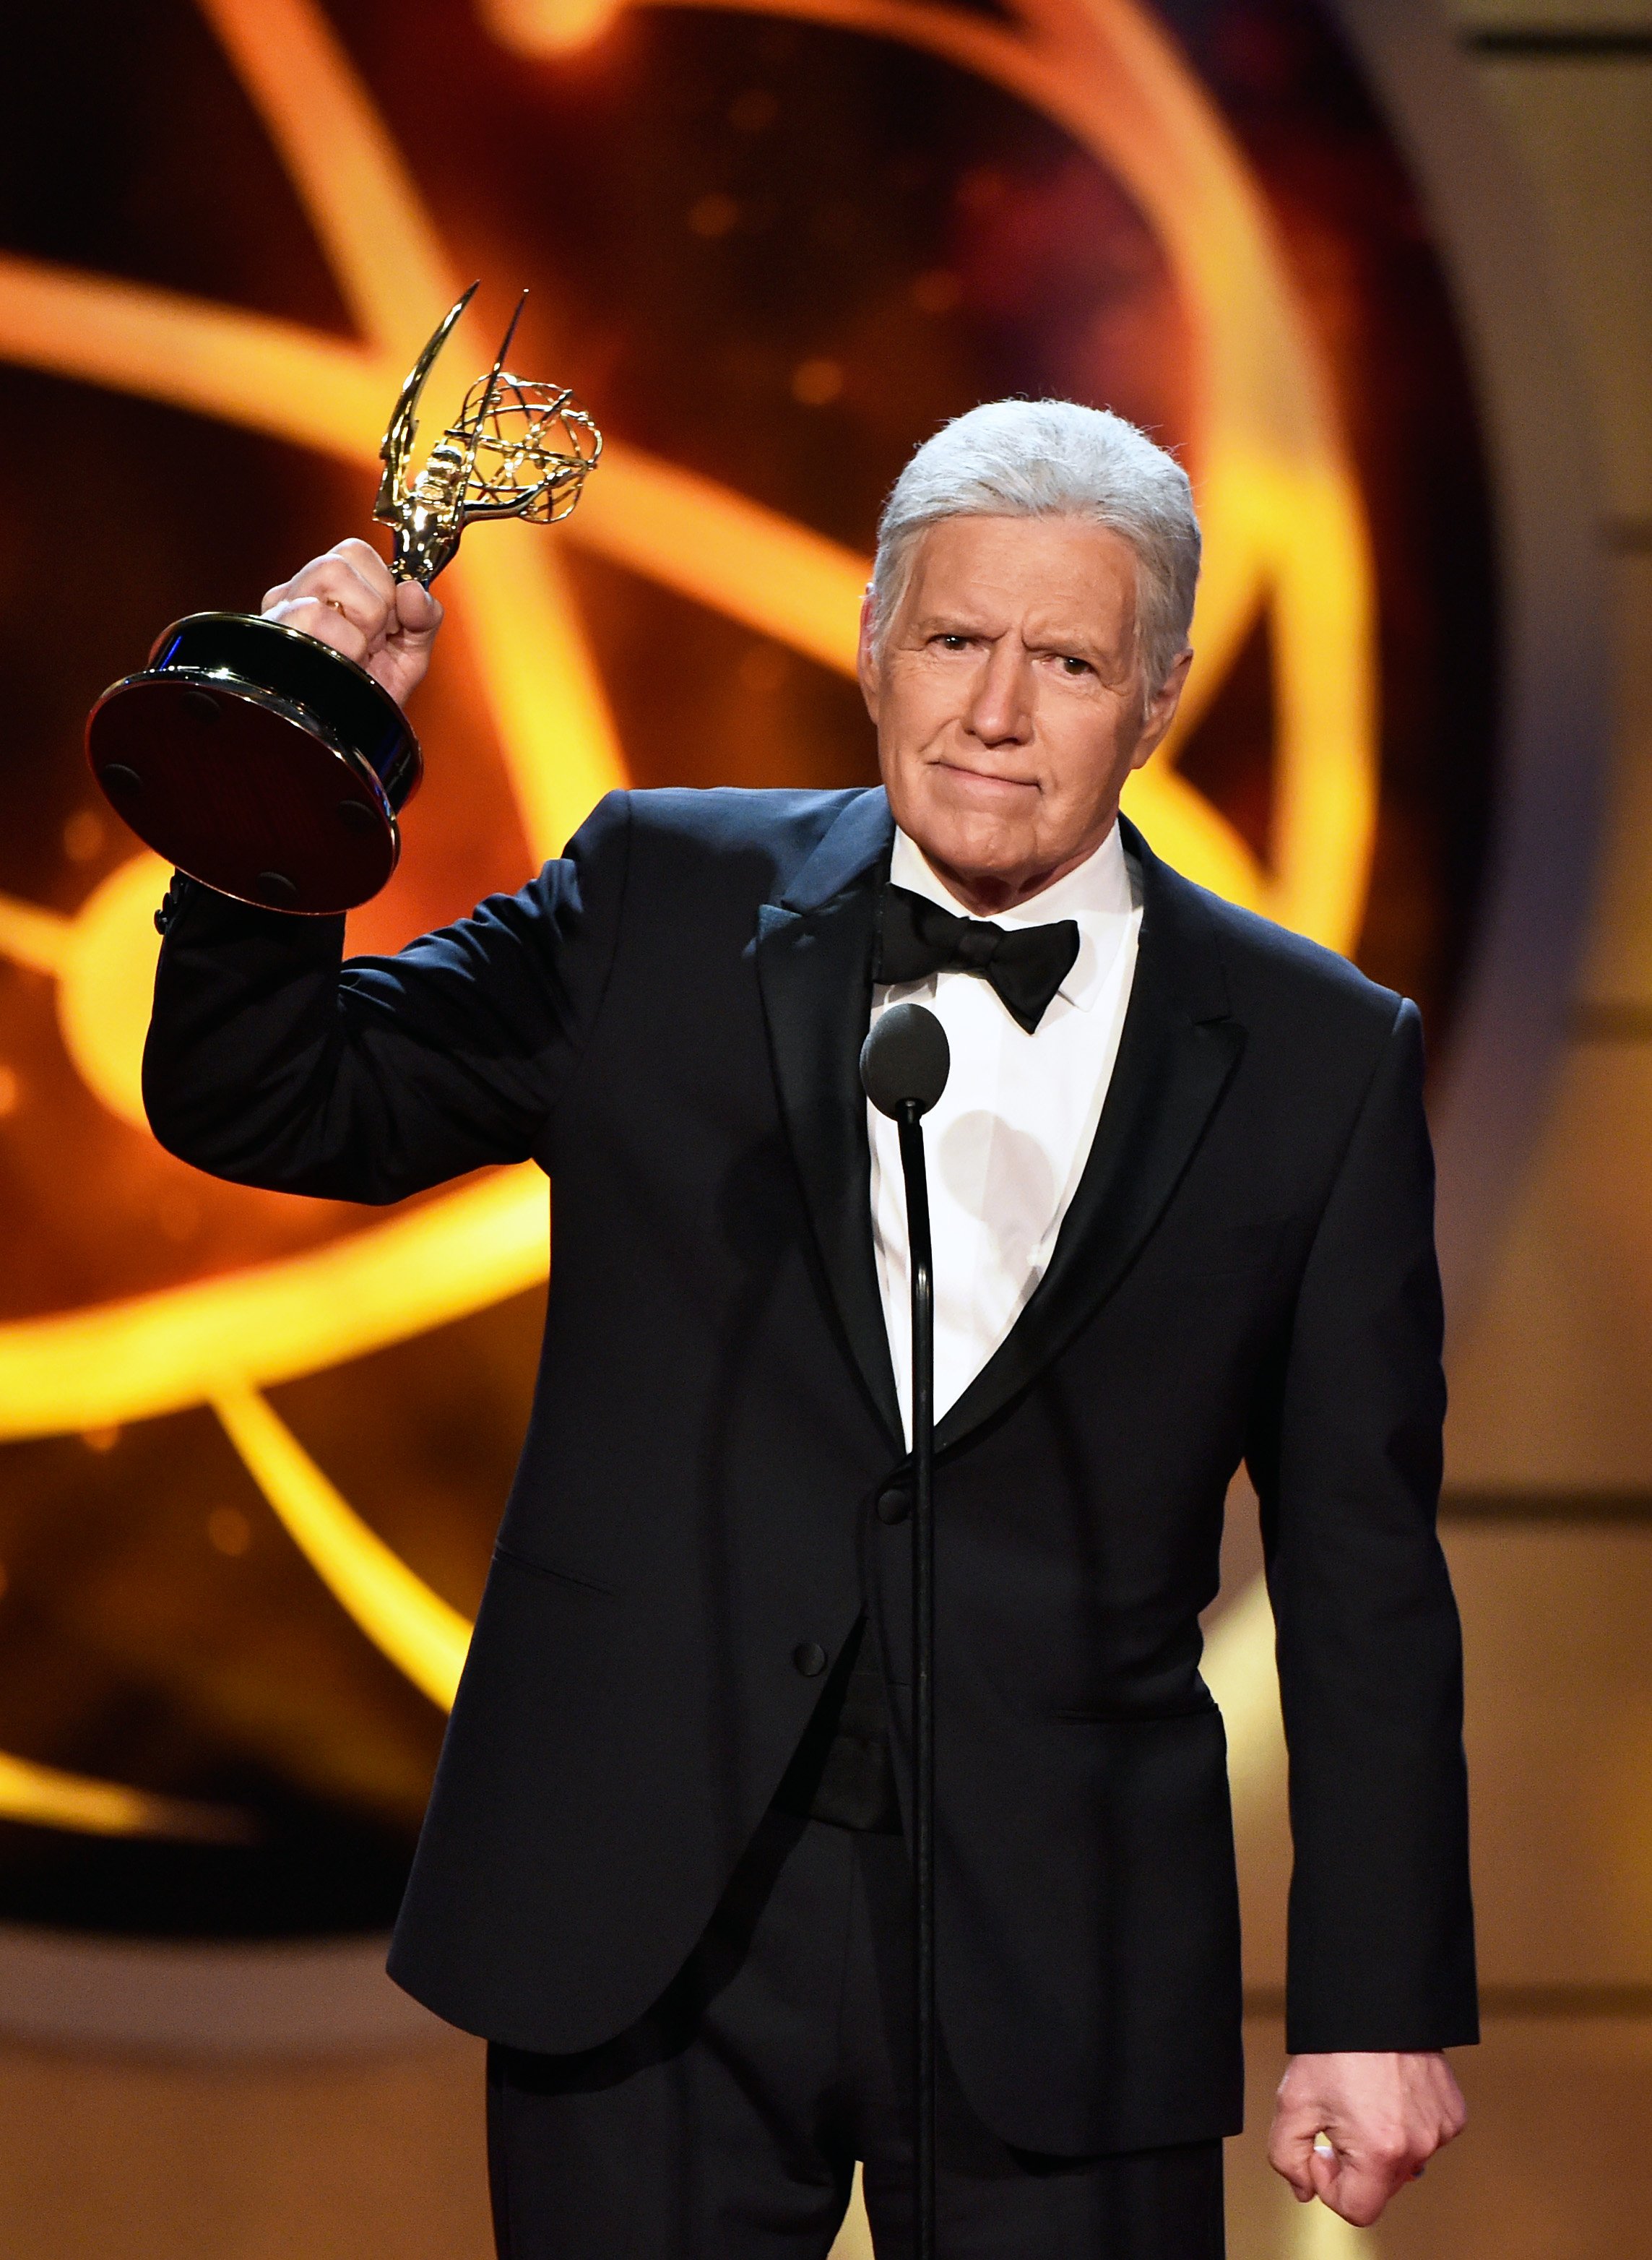 "Jeopardy!" host Alex Trebek wins an award for Outstanding Game Show Host at the 46th Annual Daytime Emmy Awards | Source: Getty Images